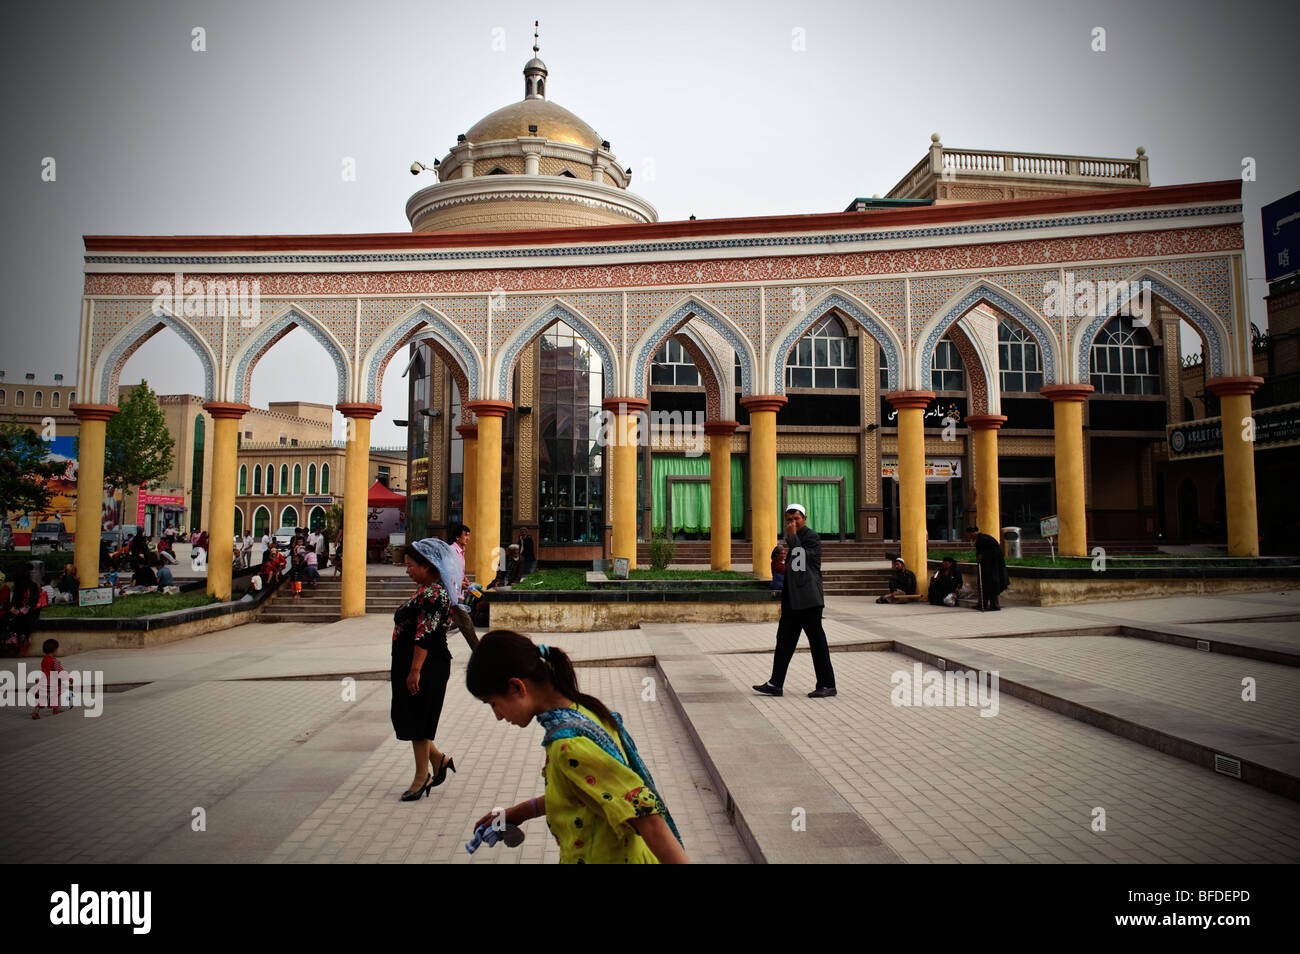 Uyghurs in one of the city squares in Kashgar, Xinjiang, China. Stock Photo